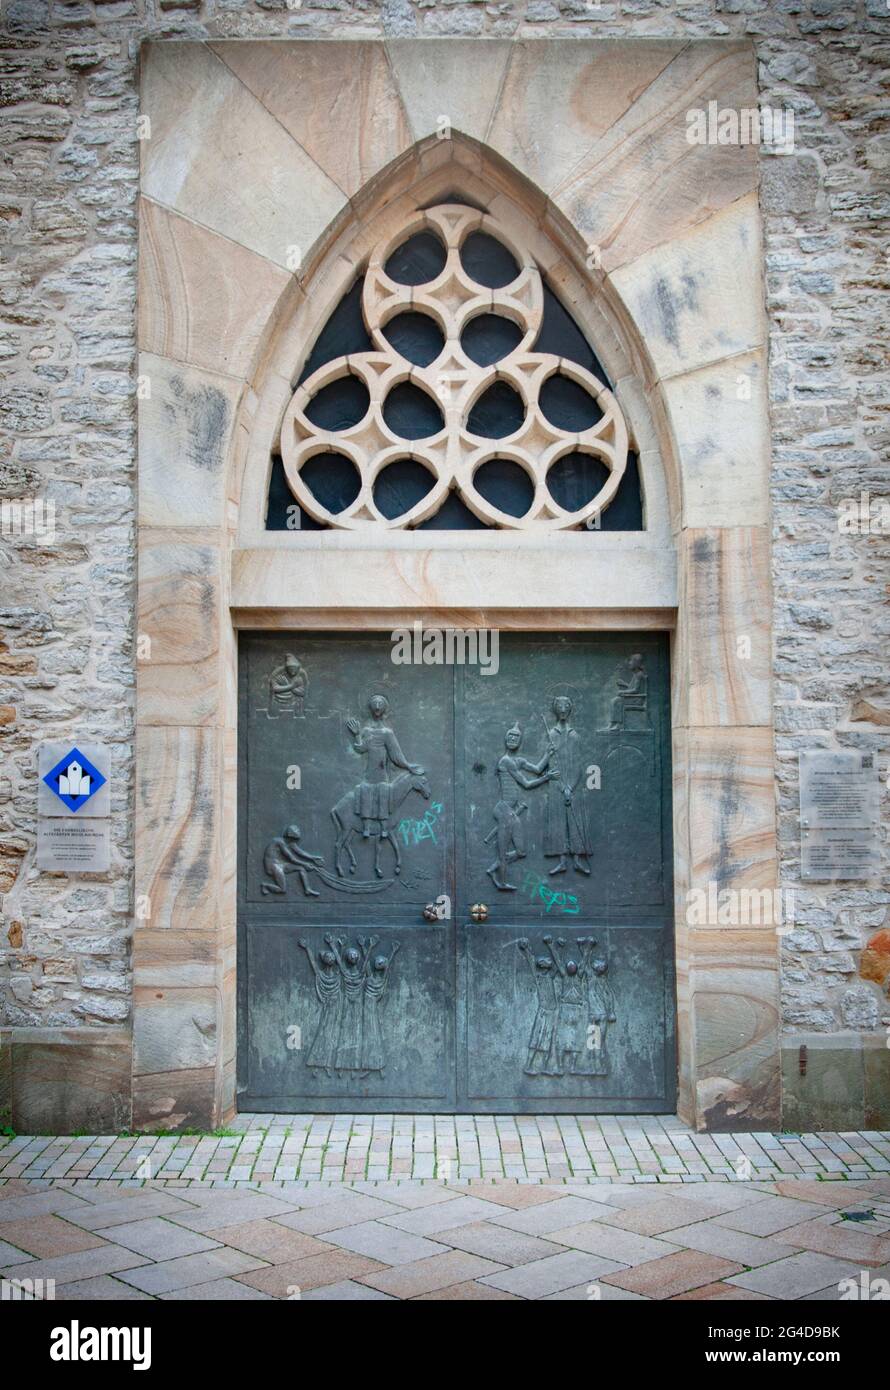 BIELEFELD, GERMANY. JUNE 12, 2021. Central gate of Old town Nicolai church. Traditional architecrure of Europe. Stock Photo